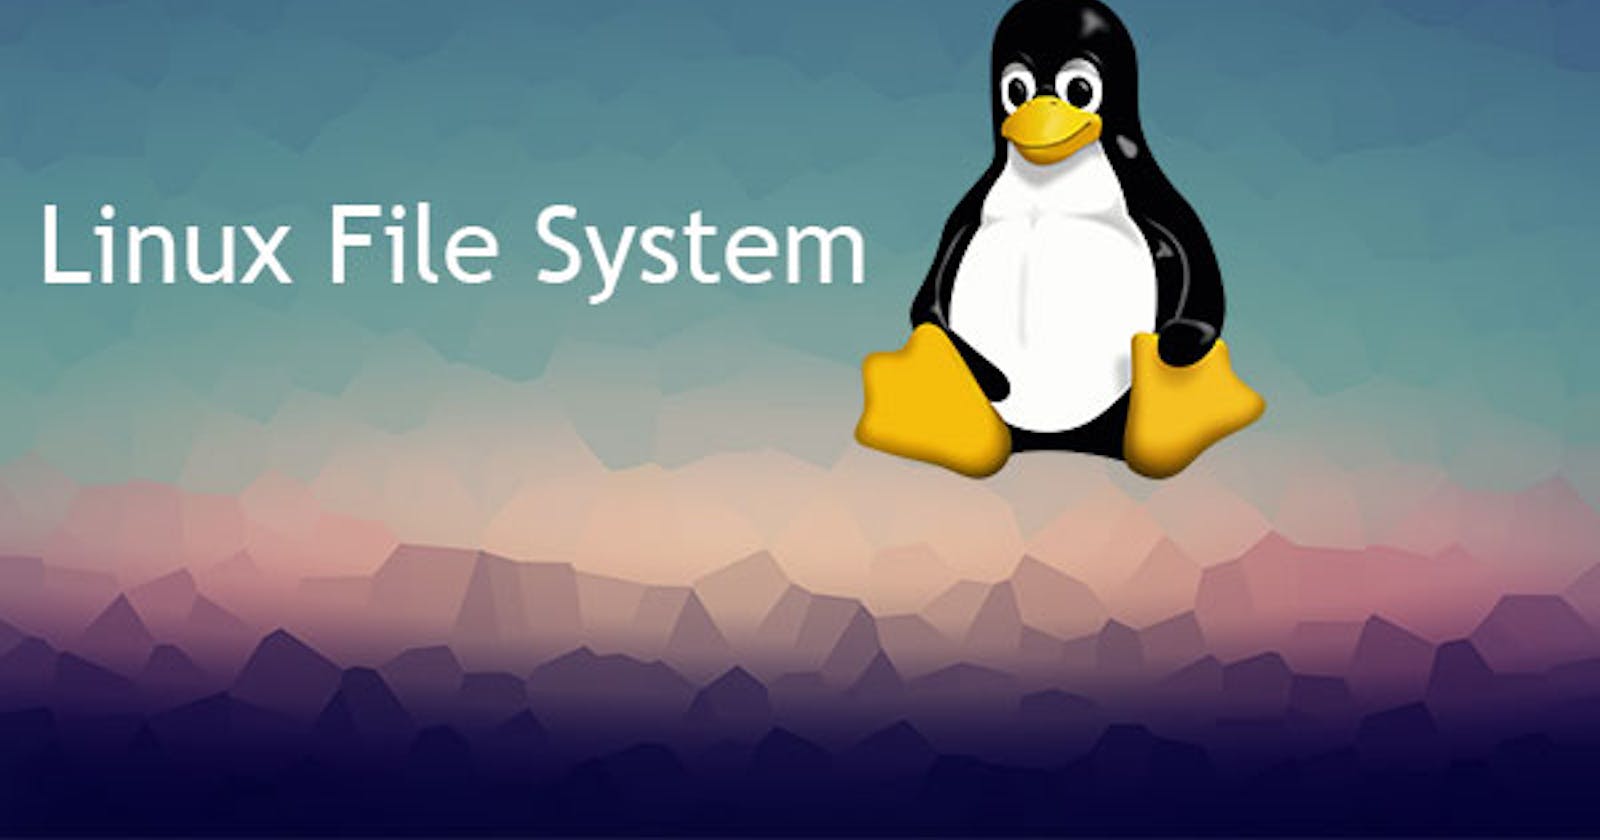 Linux File System Explained